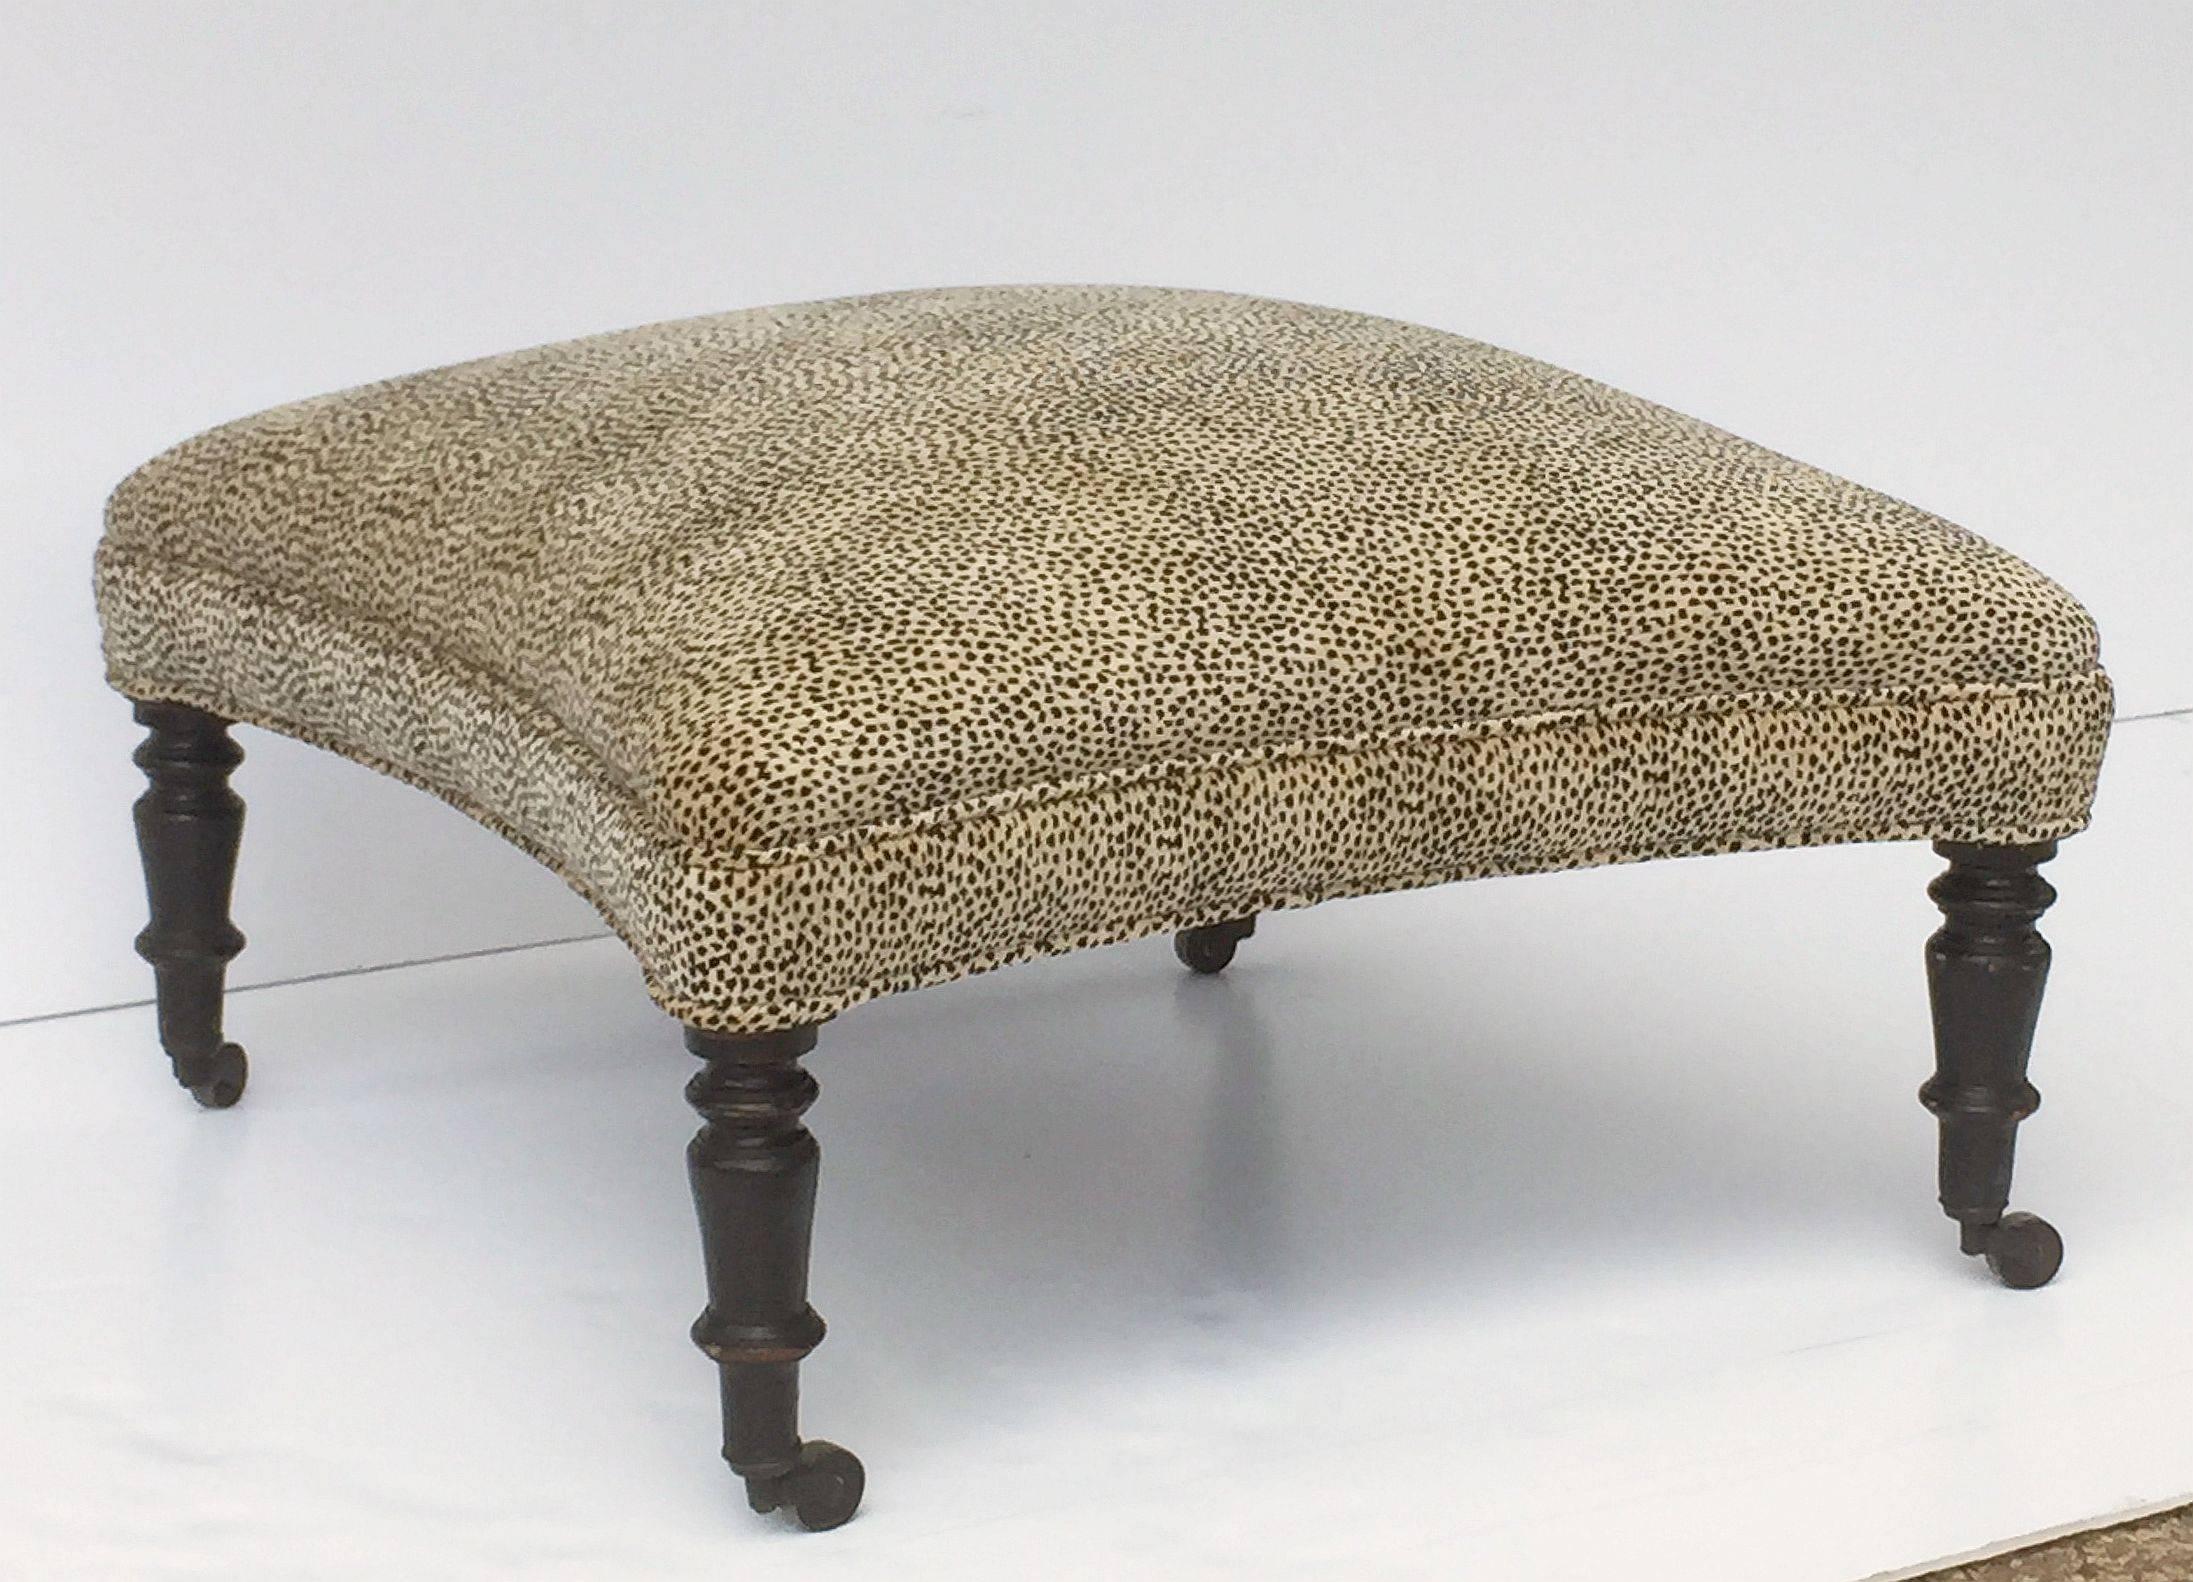 19th Century English Upholstered Ottoman on Turned Legs